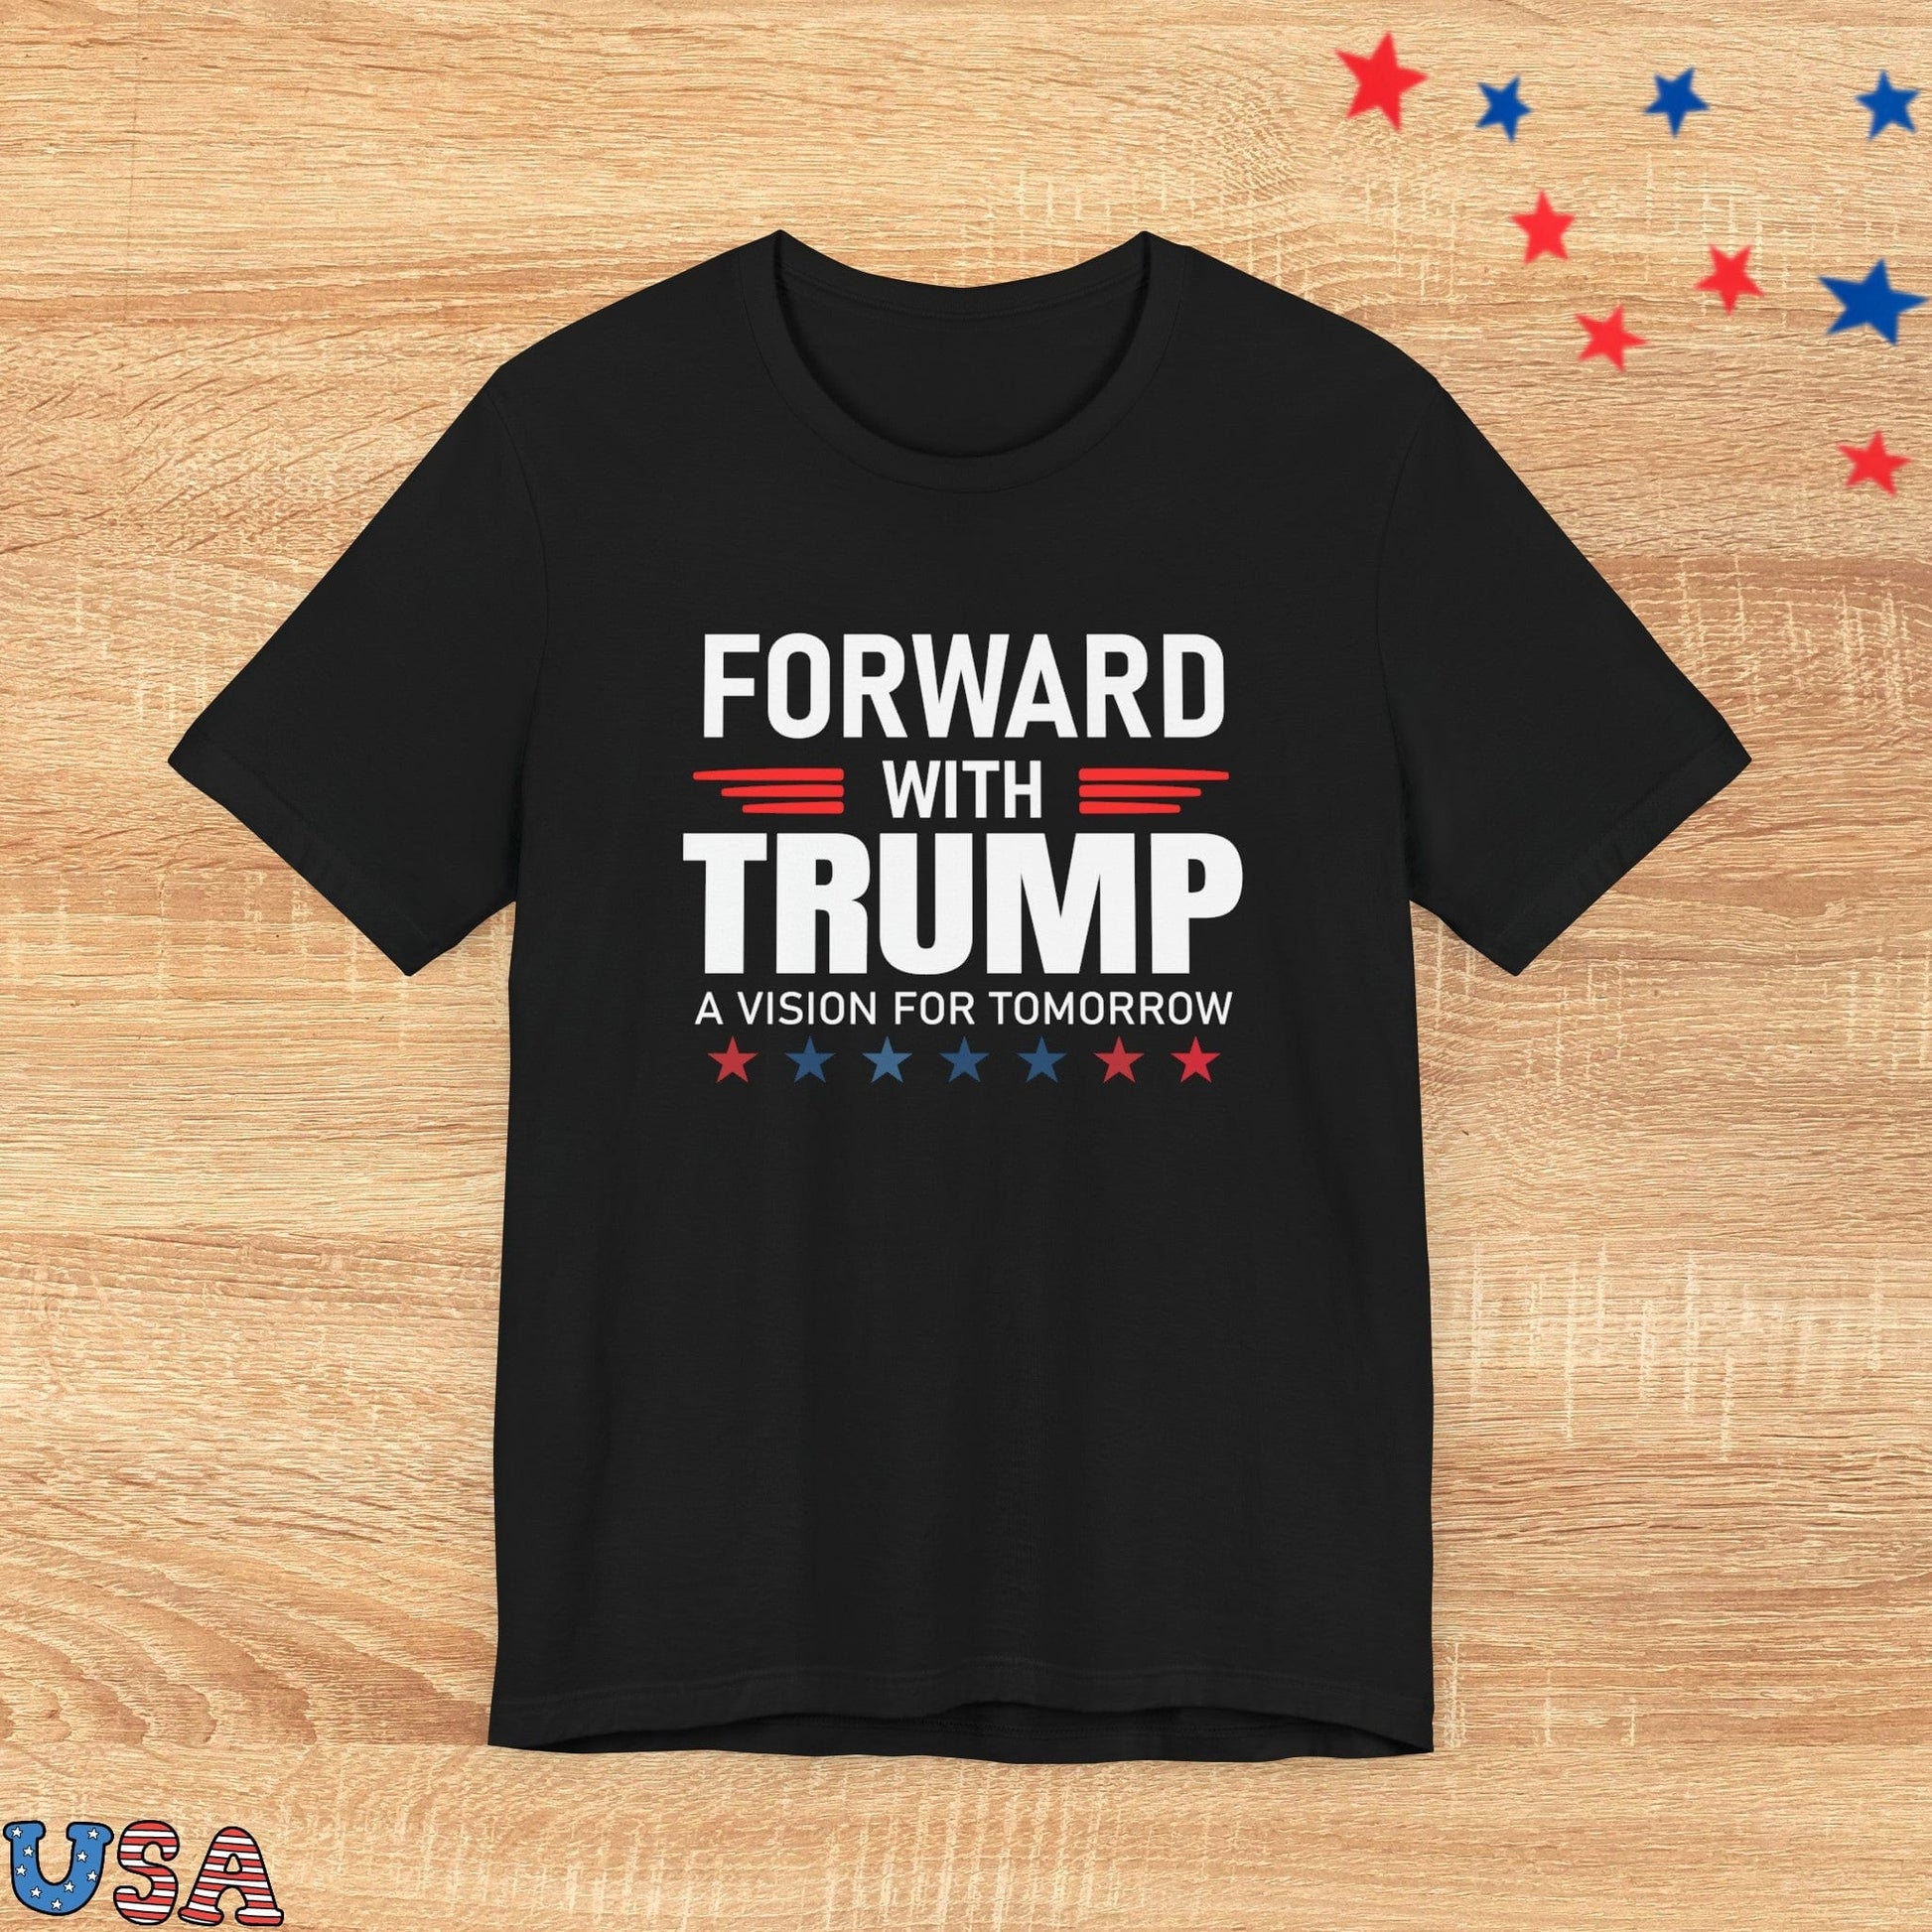 patriotic stars T-Shirt Black / XS Forward With Trump: A vision For Tomorrow